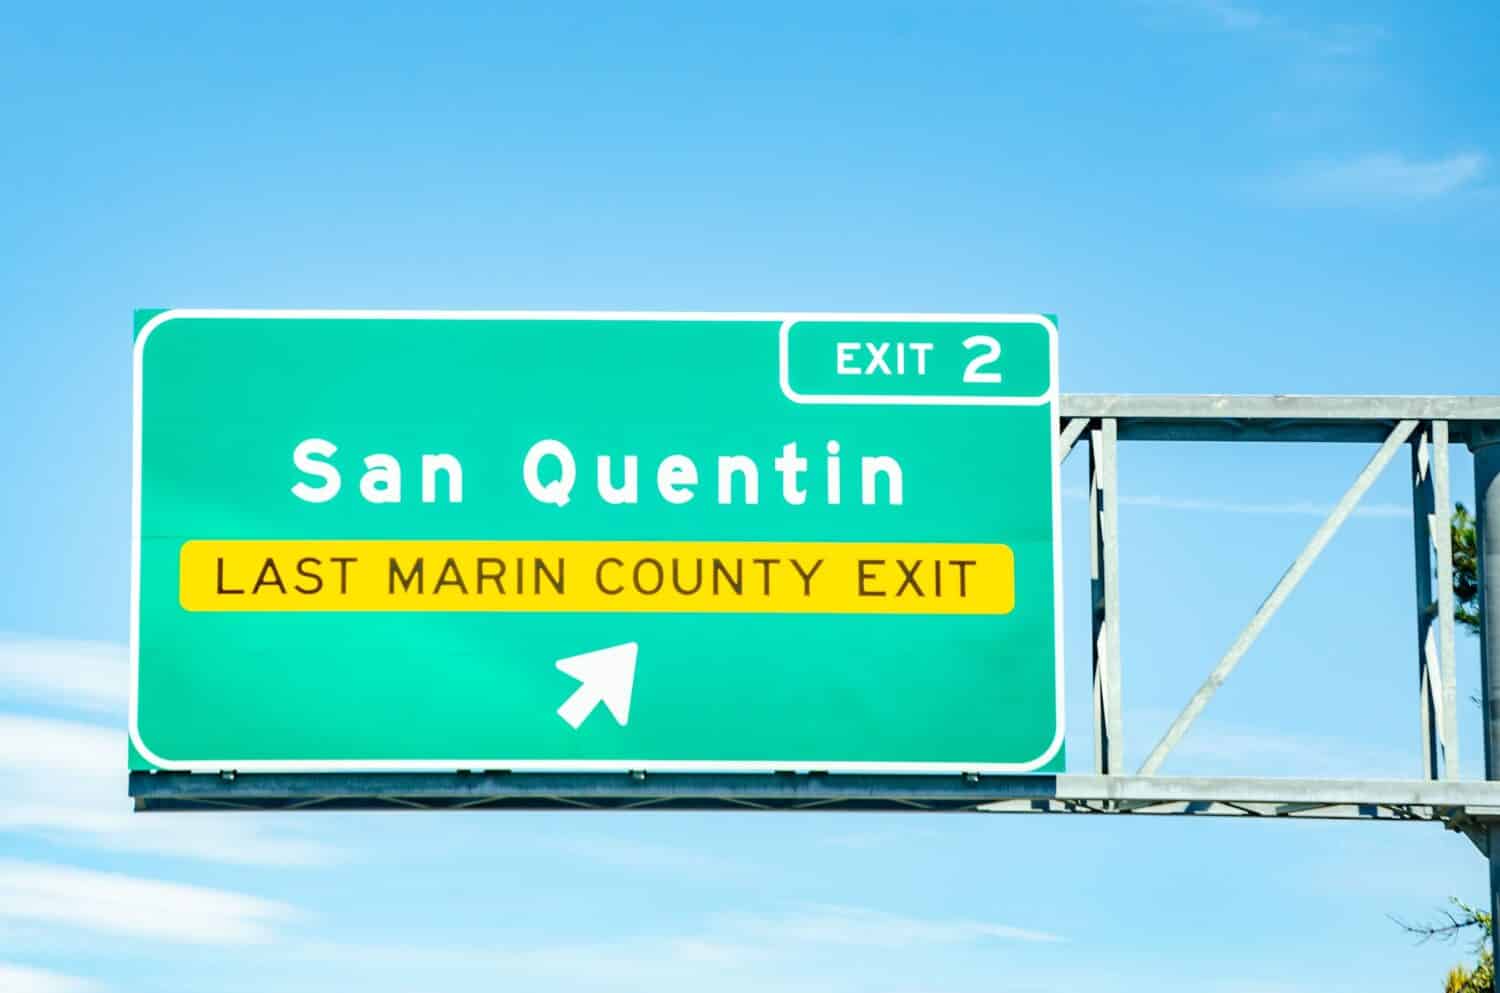 A large, green road sign informing drivers that they are approaching exit 2 for San Quentin on a highway in California, USA